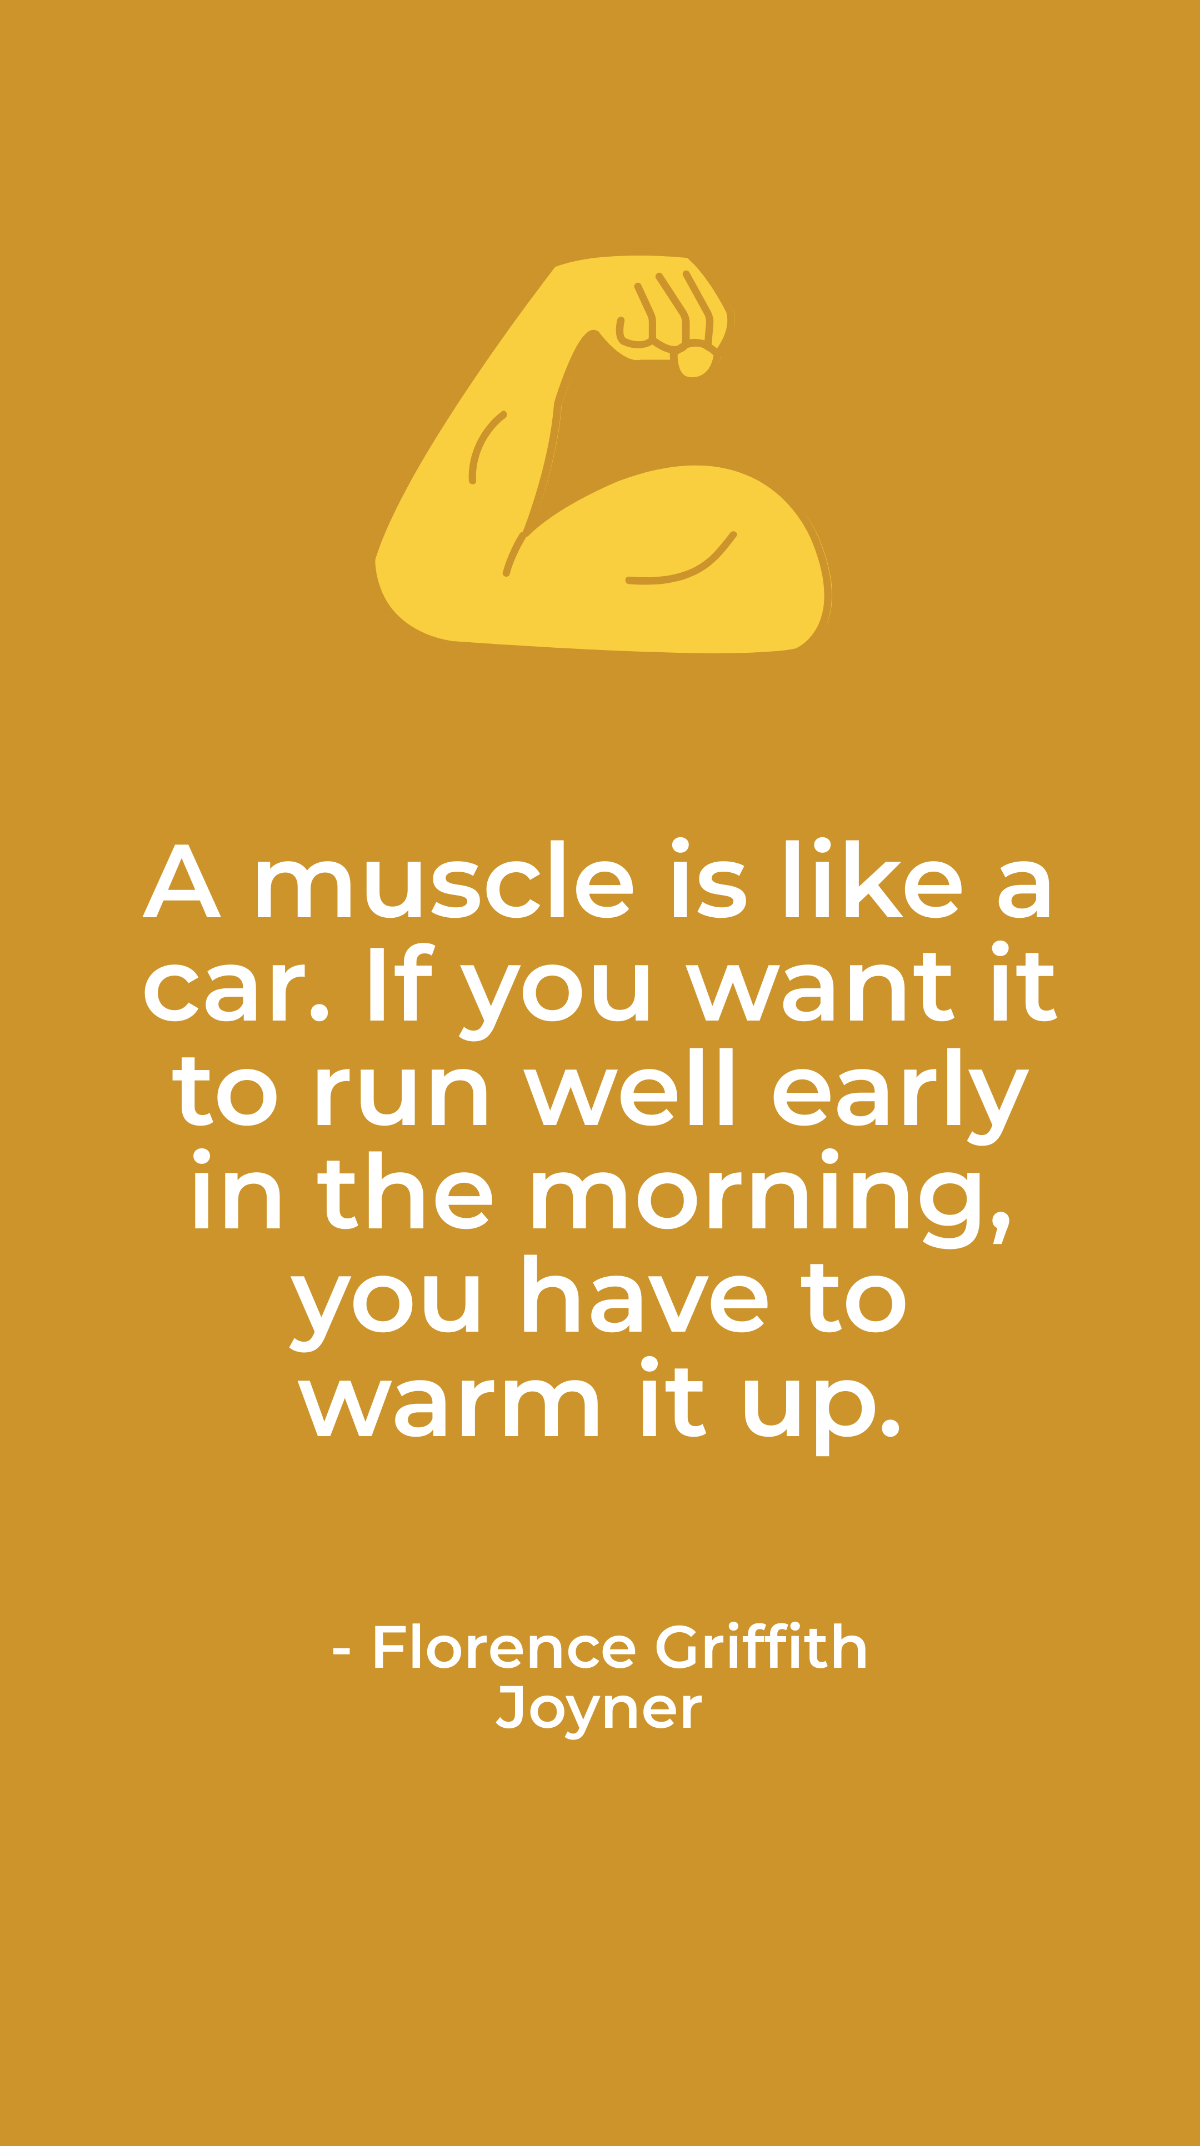 Florence Griffith Joyner - A muscle is like a car. If you want it to run well early in the morning, you have to warm it up. Template